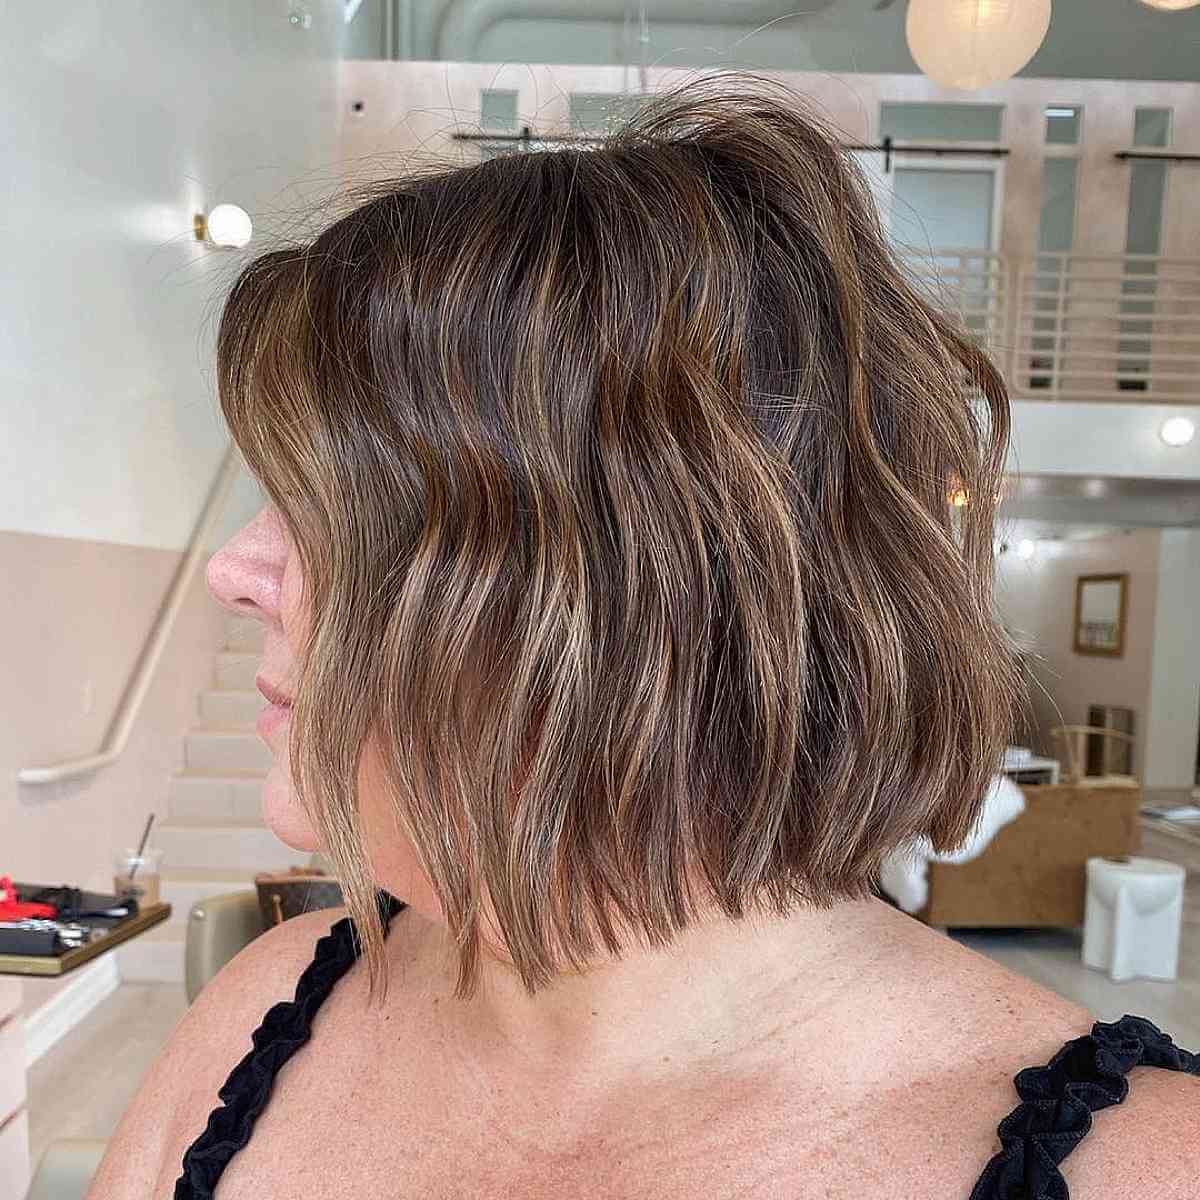 19 Flattering Short Haircut Ideas for Full Faces to Look Thinner